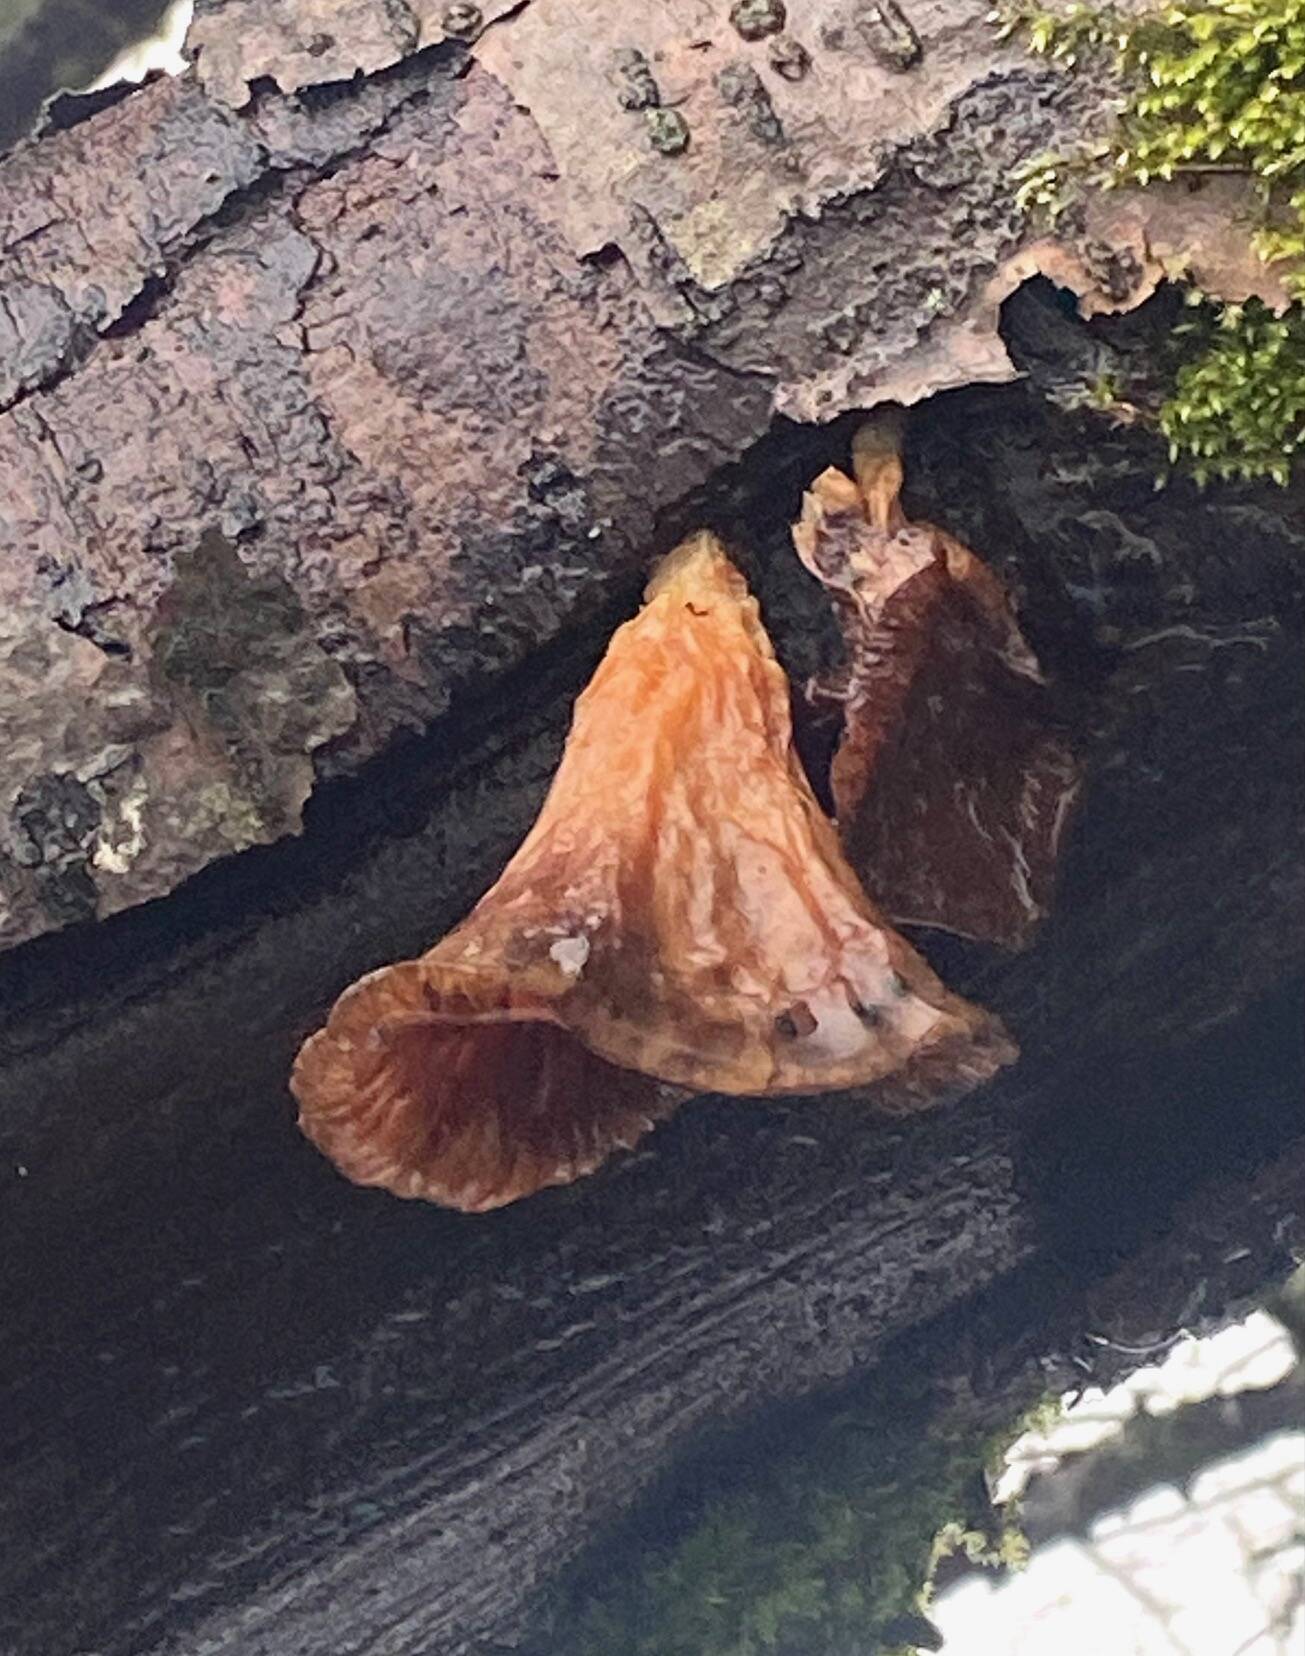 wet bell-shaped mushroom clings precariously to a decaying tree trunk near Sandy Beach on Feb. 18. (Courtesy Photo / Denise Carroll)